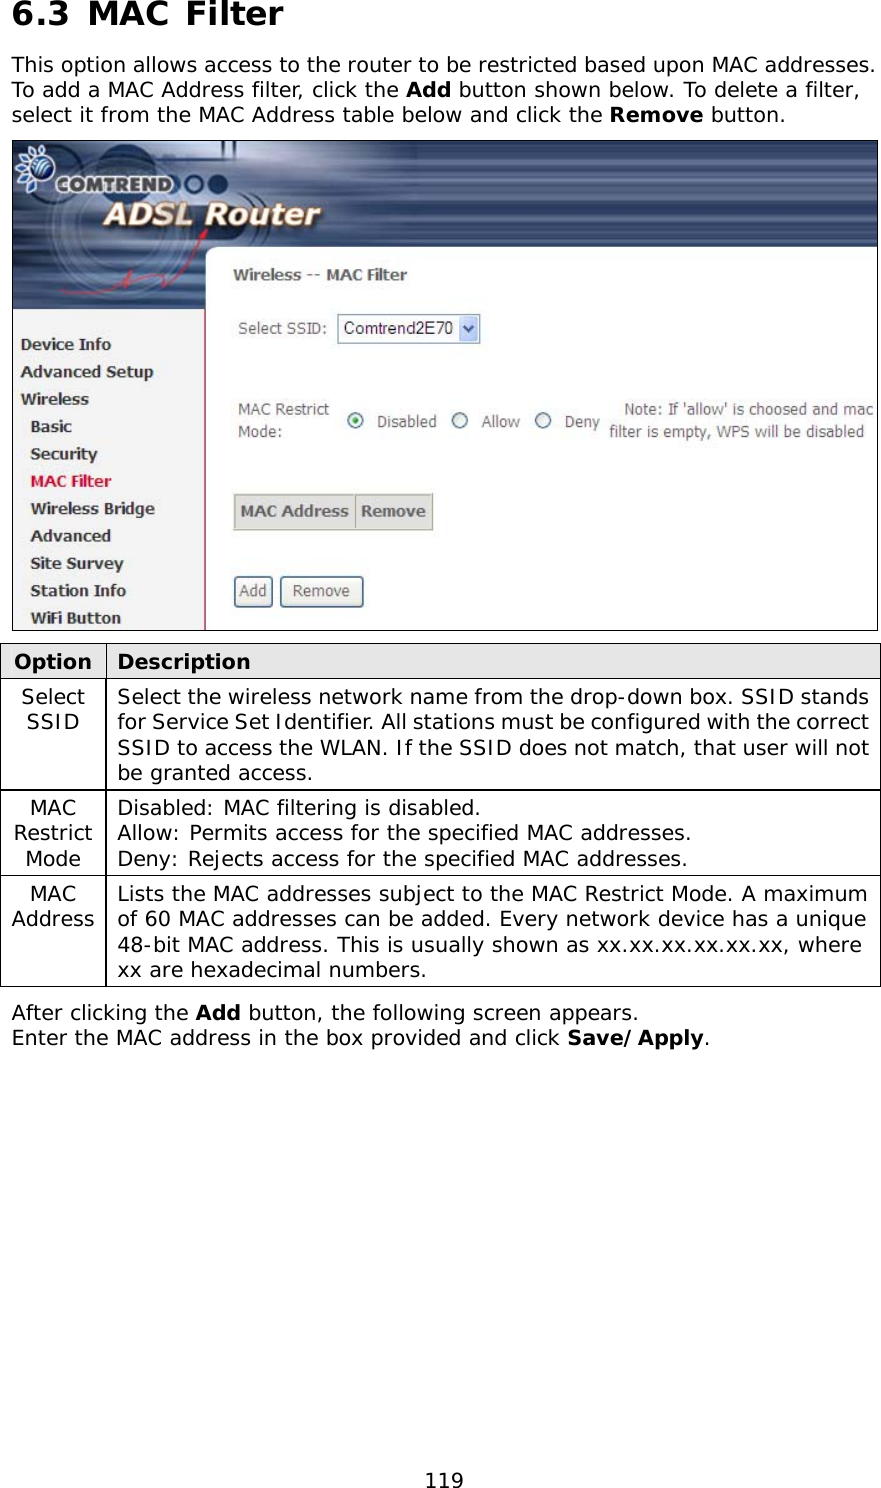  119 6.3 MAC Filter This option allows access to the router to be restricted based upon MAC addresses.  To add a MAC Address filter, click the Add button shown below. To delete a filter, select it from the MAC Address table below and click the Remove button.  Option  Description Select SSID  Select the wireless network name from the drop-down box. SSID stands for Service Set Identifier. All stations must be configured with the correct SSID to access the WLAN. If the SSID does not match, that user will not be granted access. MAC Restrict Mode Disabled: MAC filtering is disabled. Allow: Permits access for the specified MAC addresses. Deny: Rejects access for the specified MAC addresses. MAC Address  Lists the MAC addresses subject to the MAC Restrict Mode. A maximum of 60 MAC addresses can be added. Every network device has a unique 48-bit MAC address. This is usually shown as xx.xx.xx.xx.xx.xx, where xx are hexadecimal numbers.   After clicking the Add button, the following screen appears.   Enter the MAC address in the box provided and click Save/Apply. 